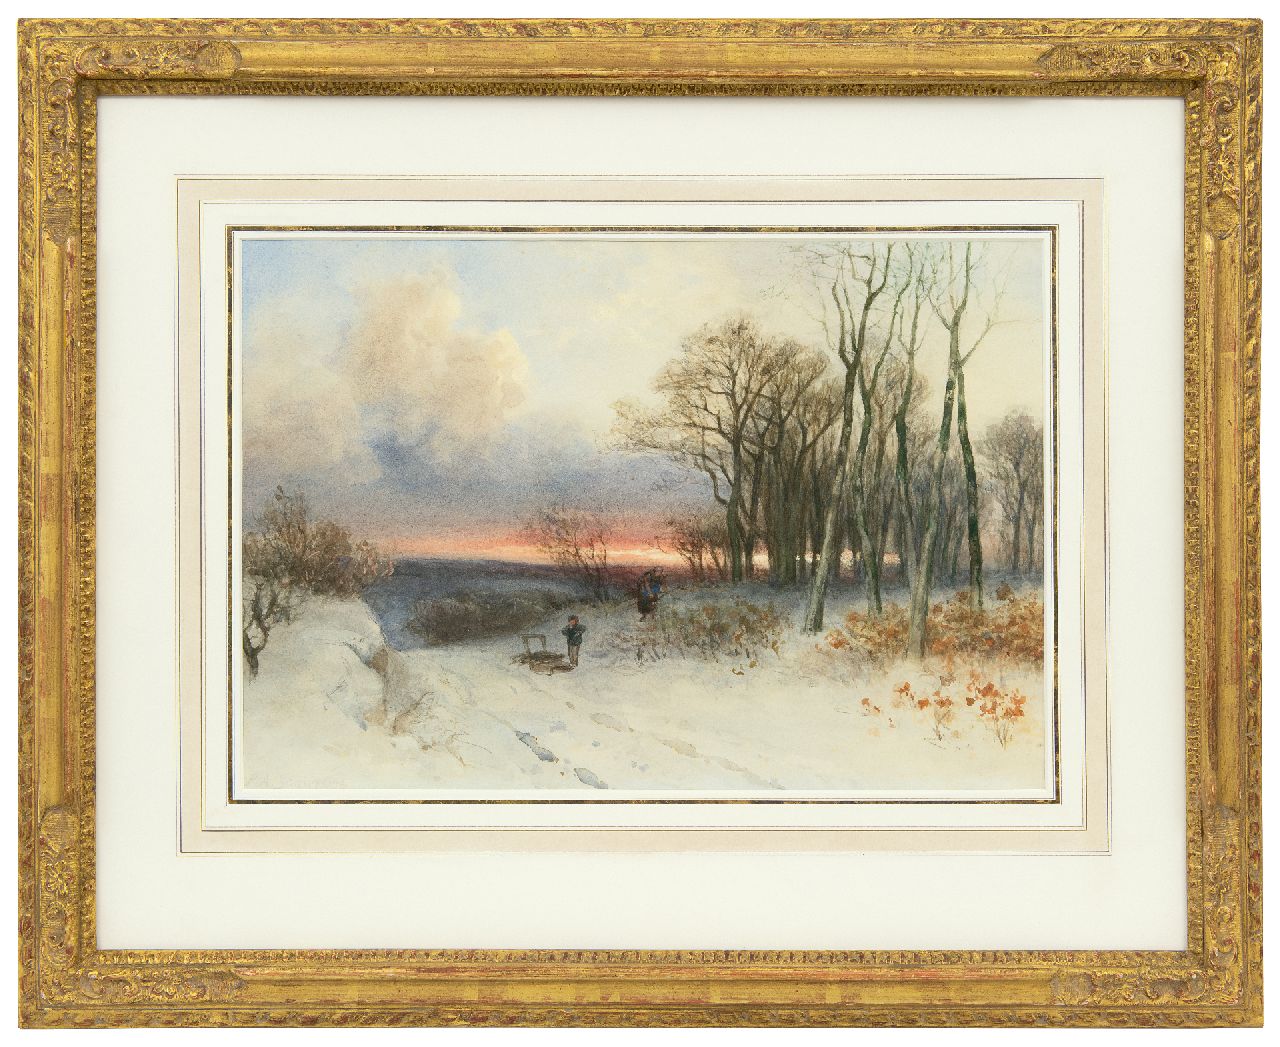 Schipperus P.A.  | Pieter Adrianus 'Piet' Schipperus | Watercolours and drawings offered for sale | Wood gatherers in a snowy landscape, watercolour on paper 40.0 x 50.0 cm, signed l.l.